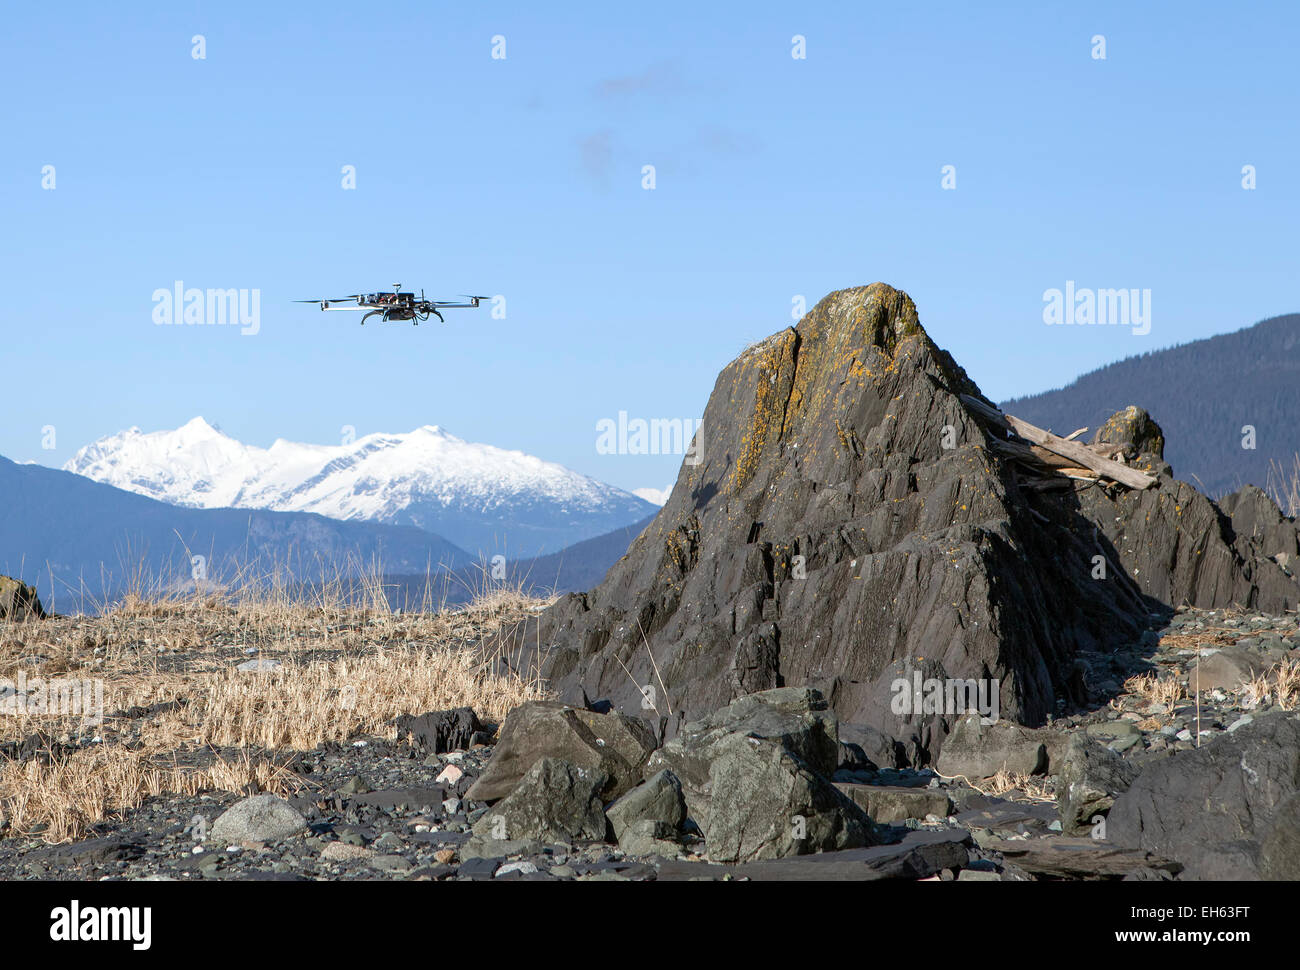 Quadcopter drone flying over rocks on a Southeast Alaskan beach on a sunny day. Stock Photo